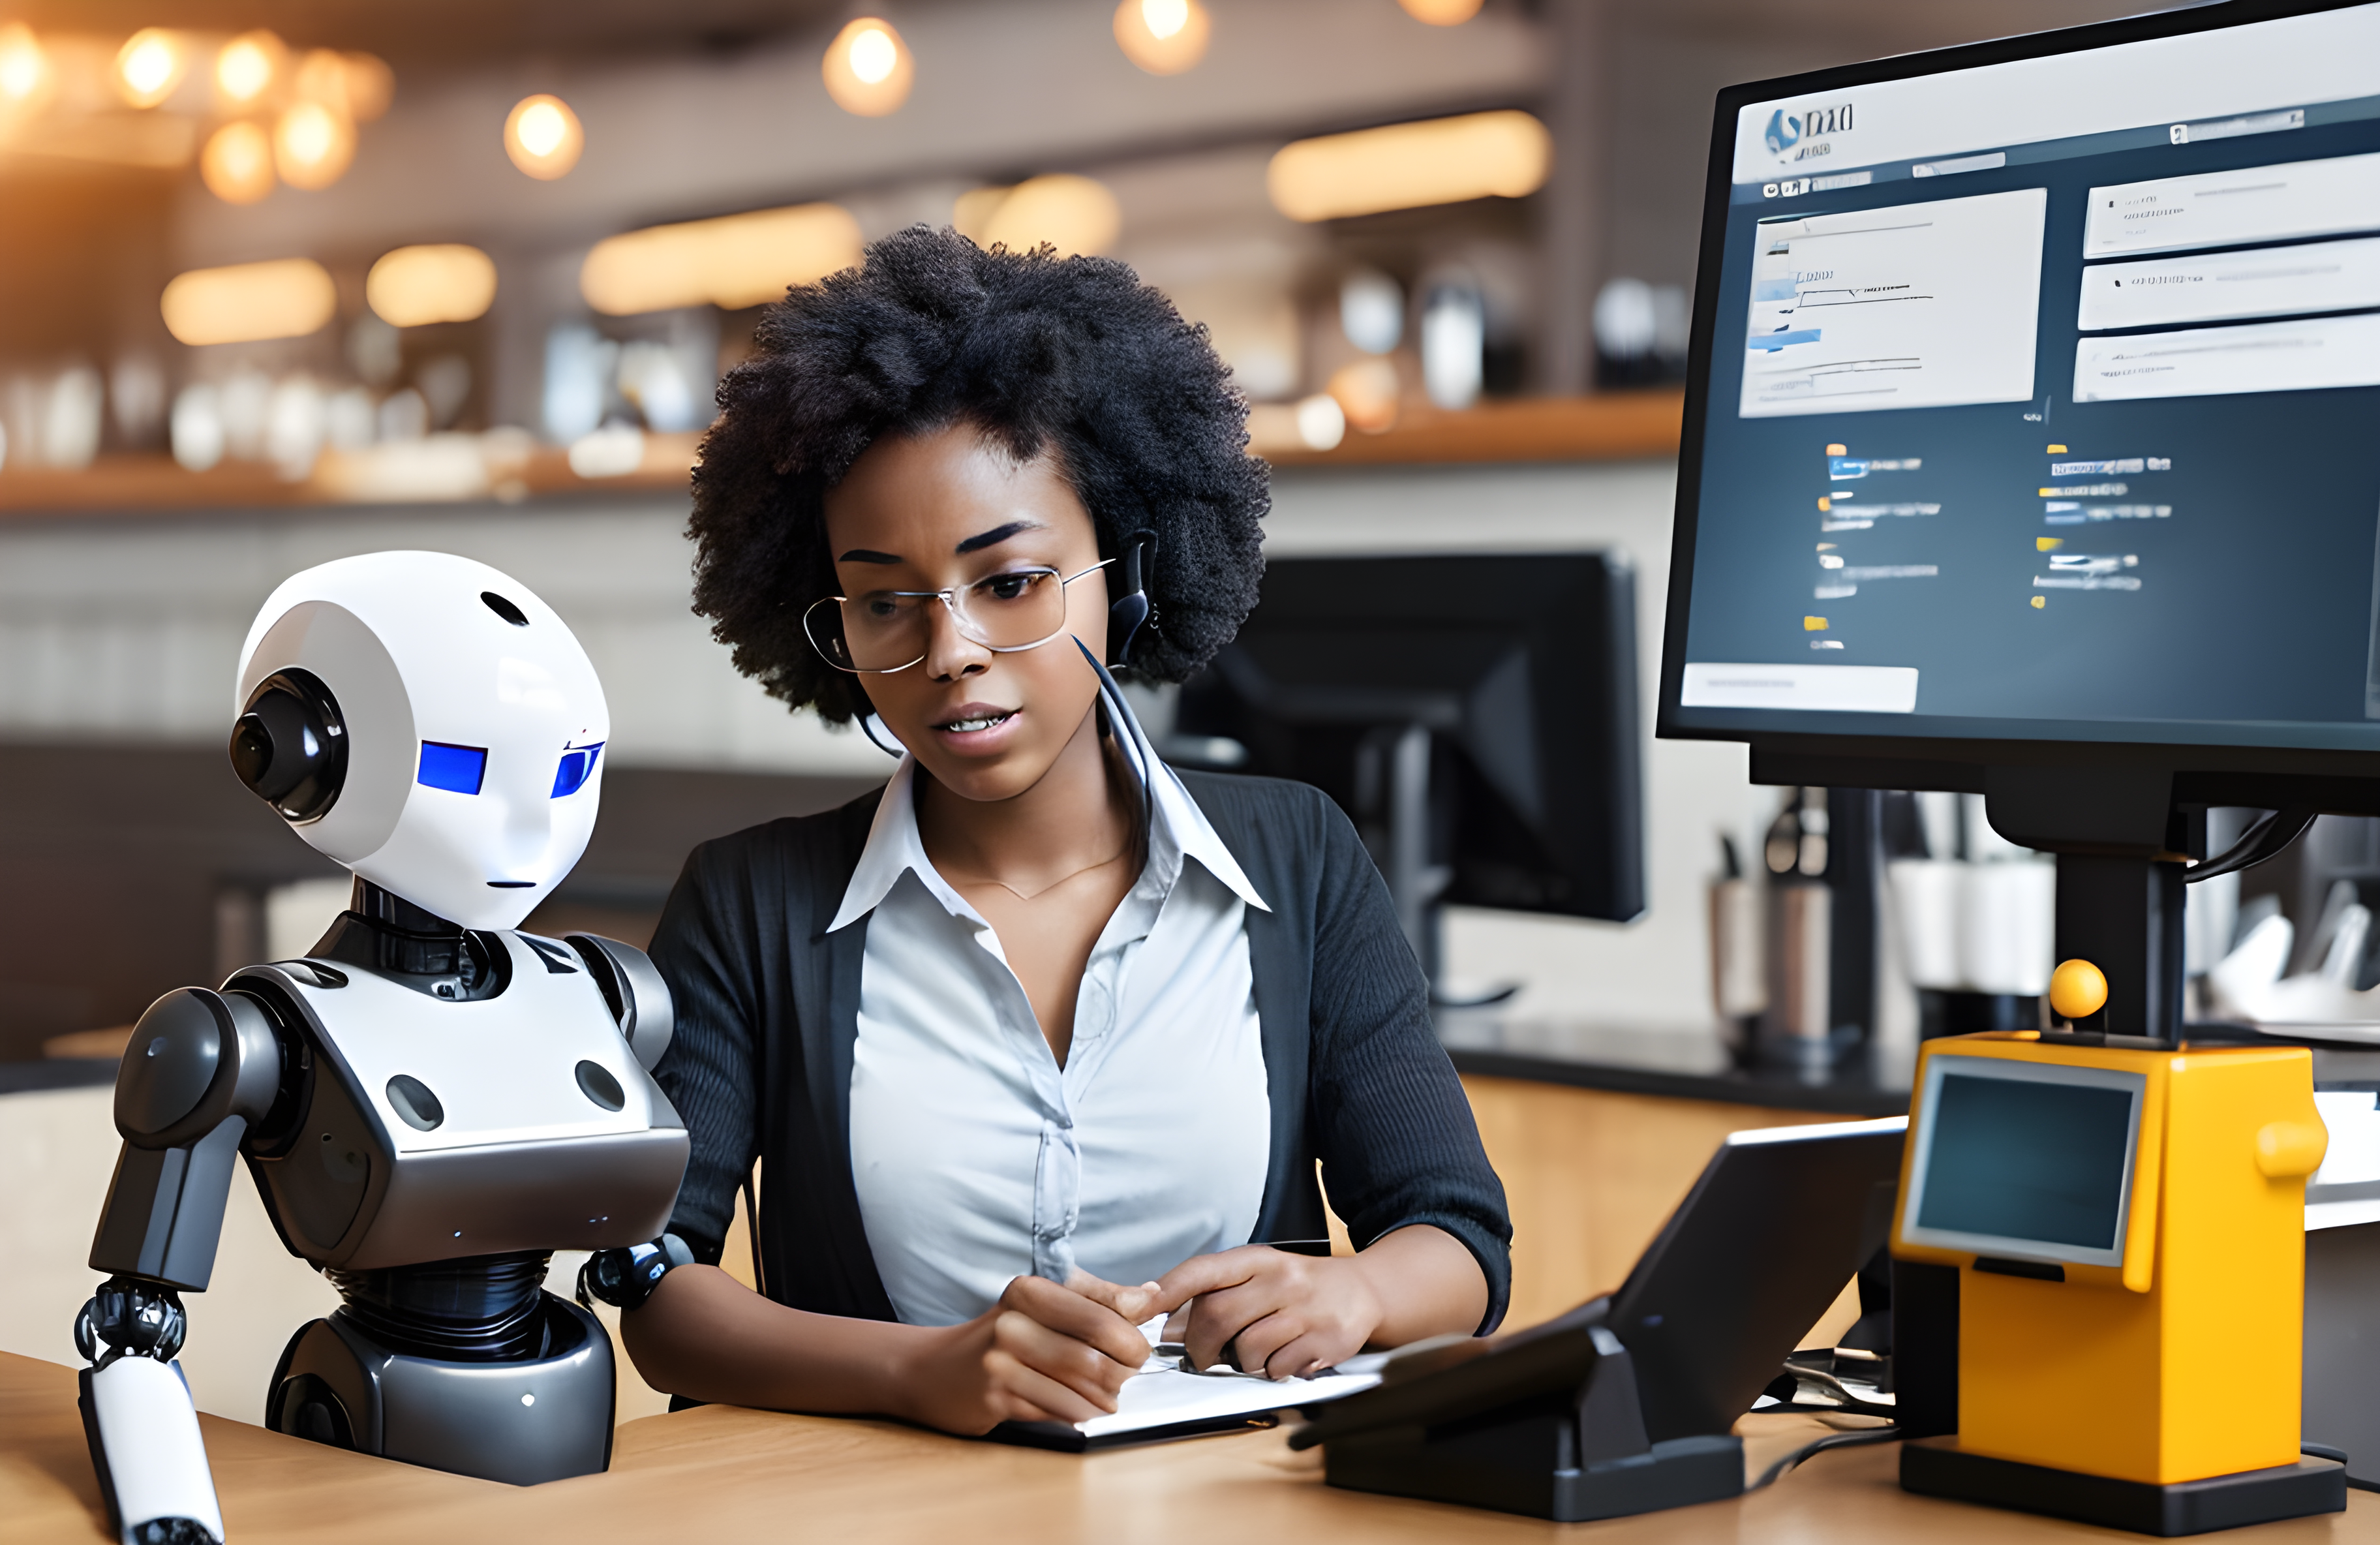 A robot assisting a customer care agent. Image generated using Playground AI. Prompt supplied by Muhammed Akinyemi